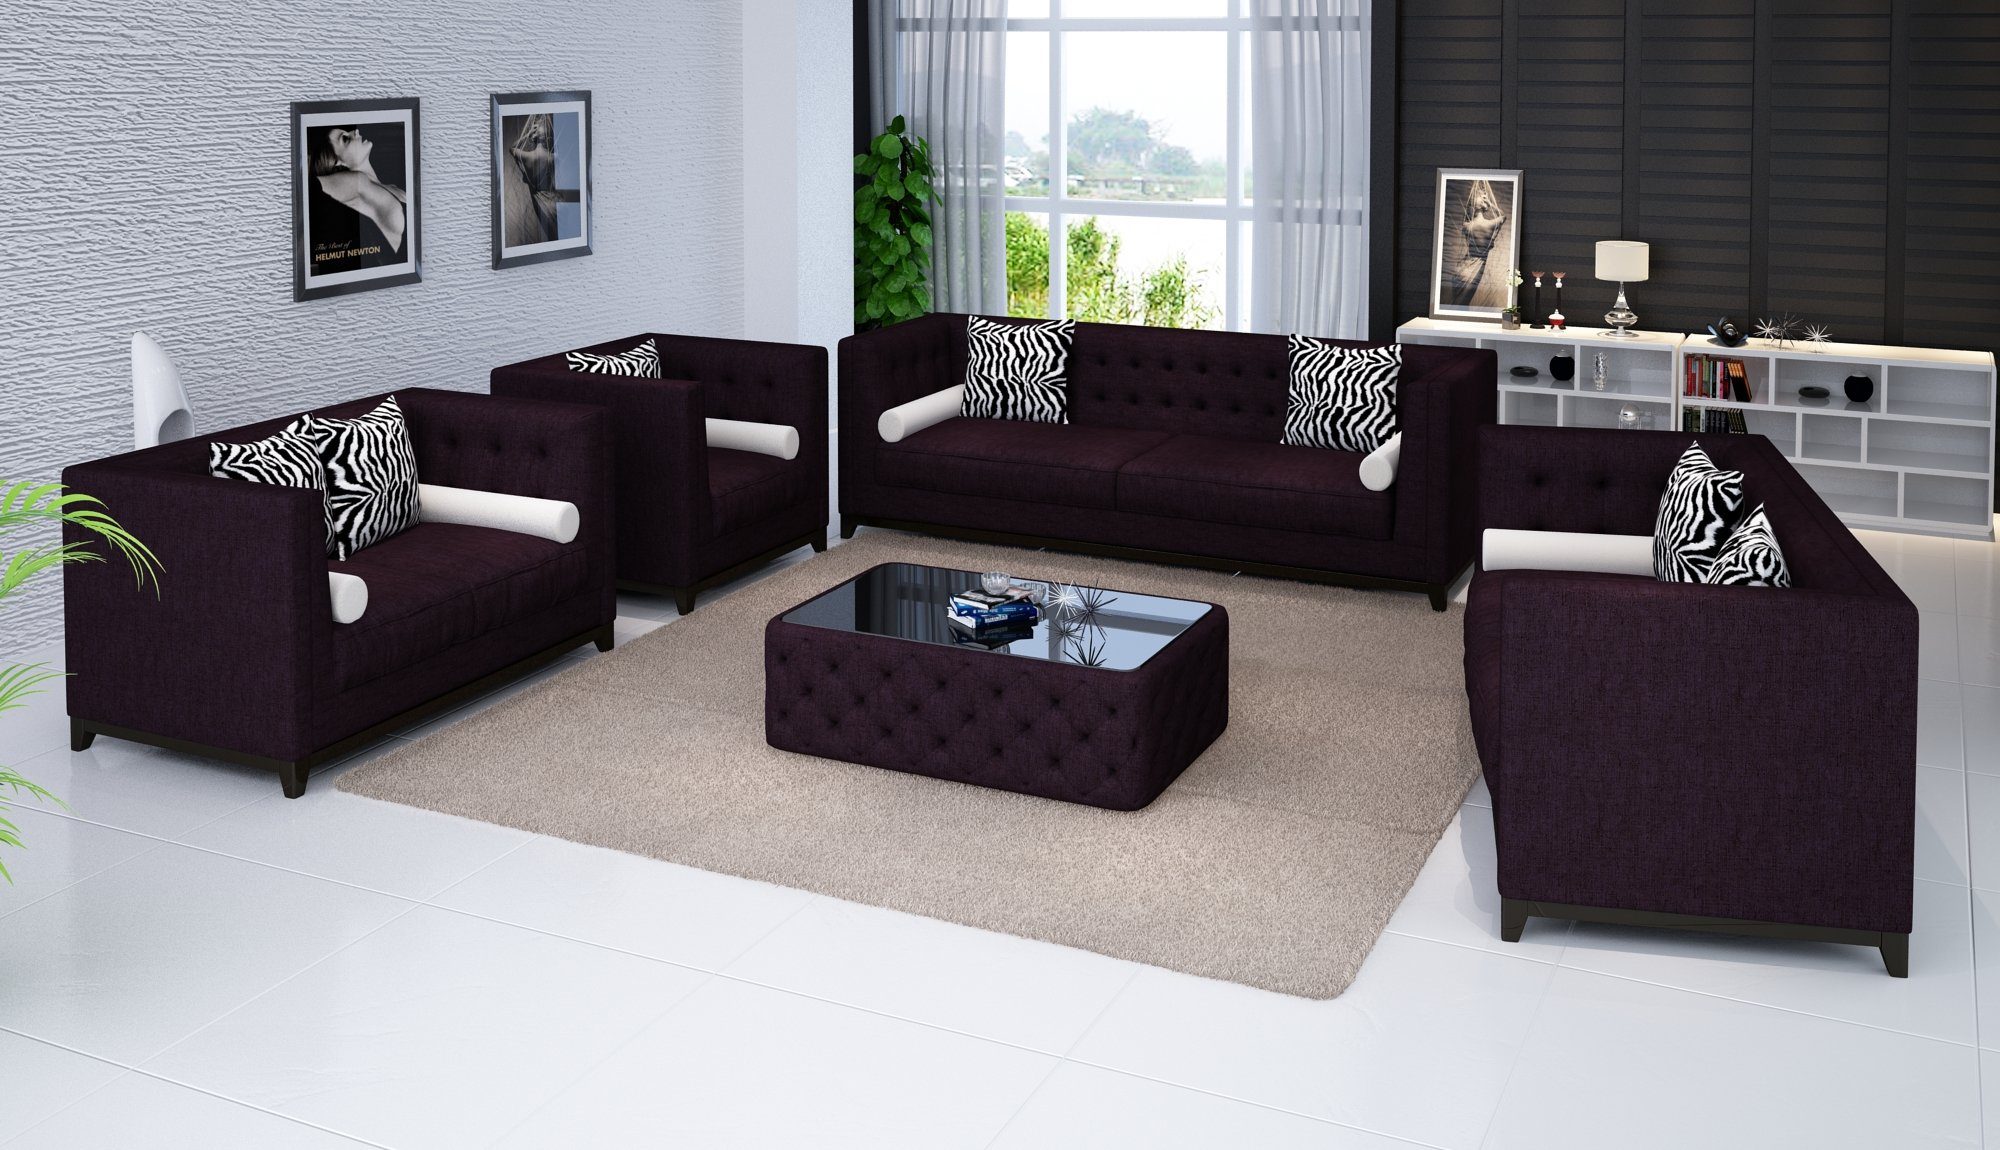 JVmoebel Sofa Rote Chesterfield Sofagarnitur Sofa Couchen Couch 3tlg Sessel, Made in Europe Lila